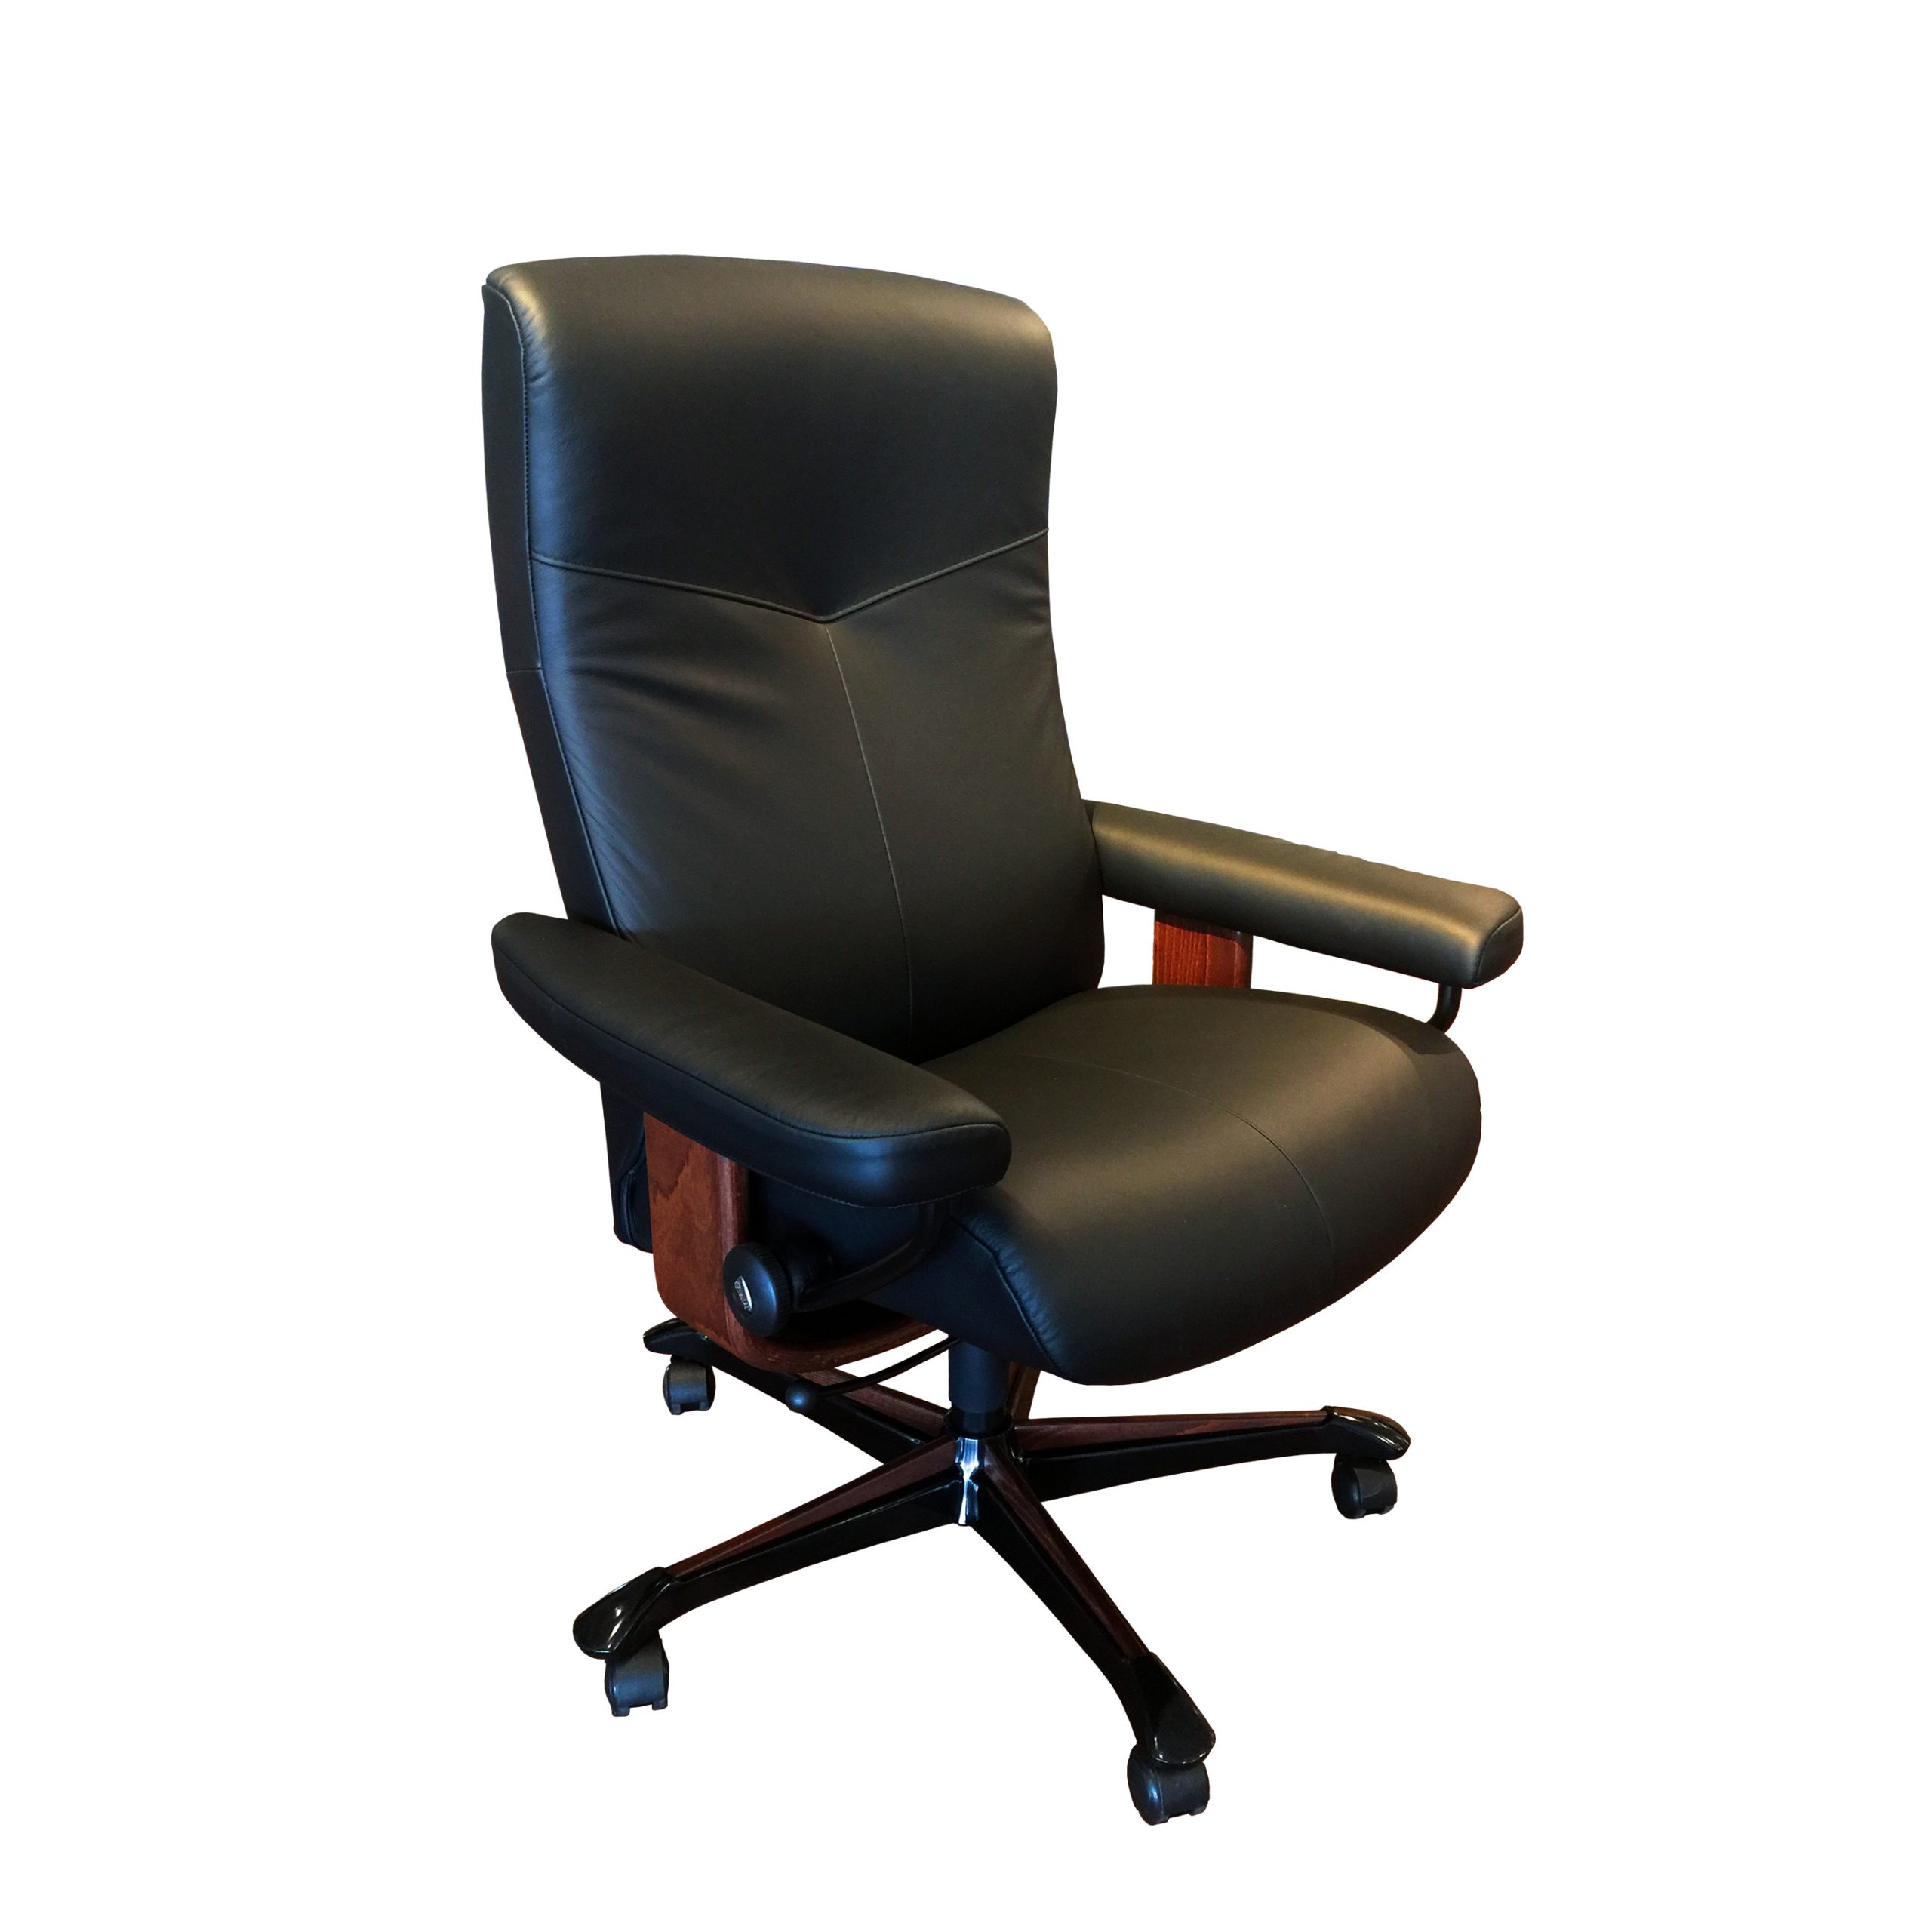 Stressless Dover Office Chair Scandesigns Furniture